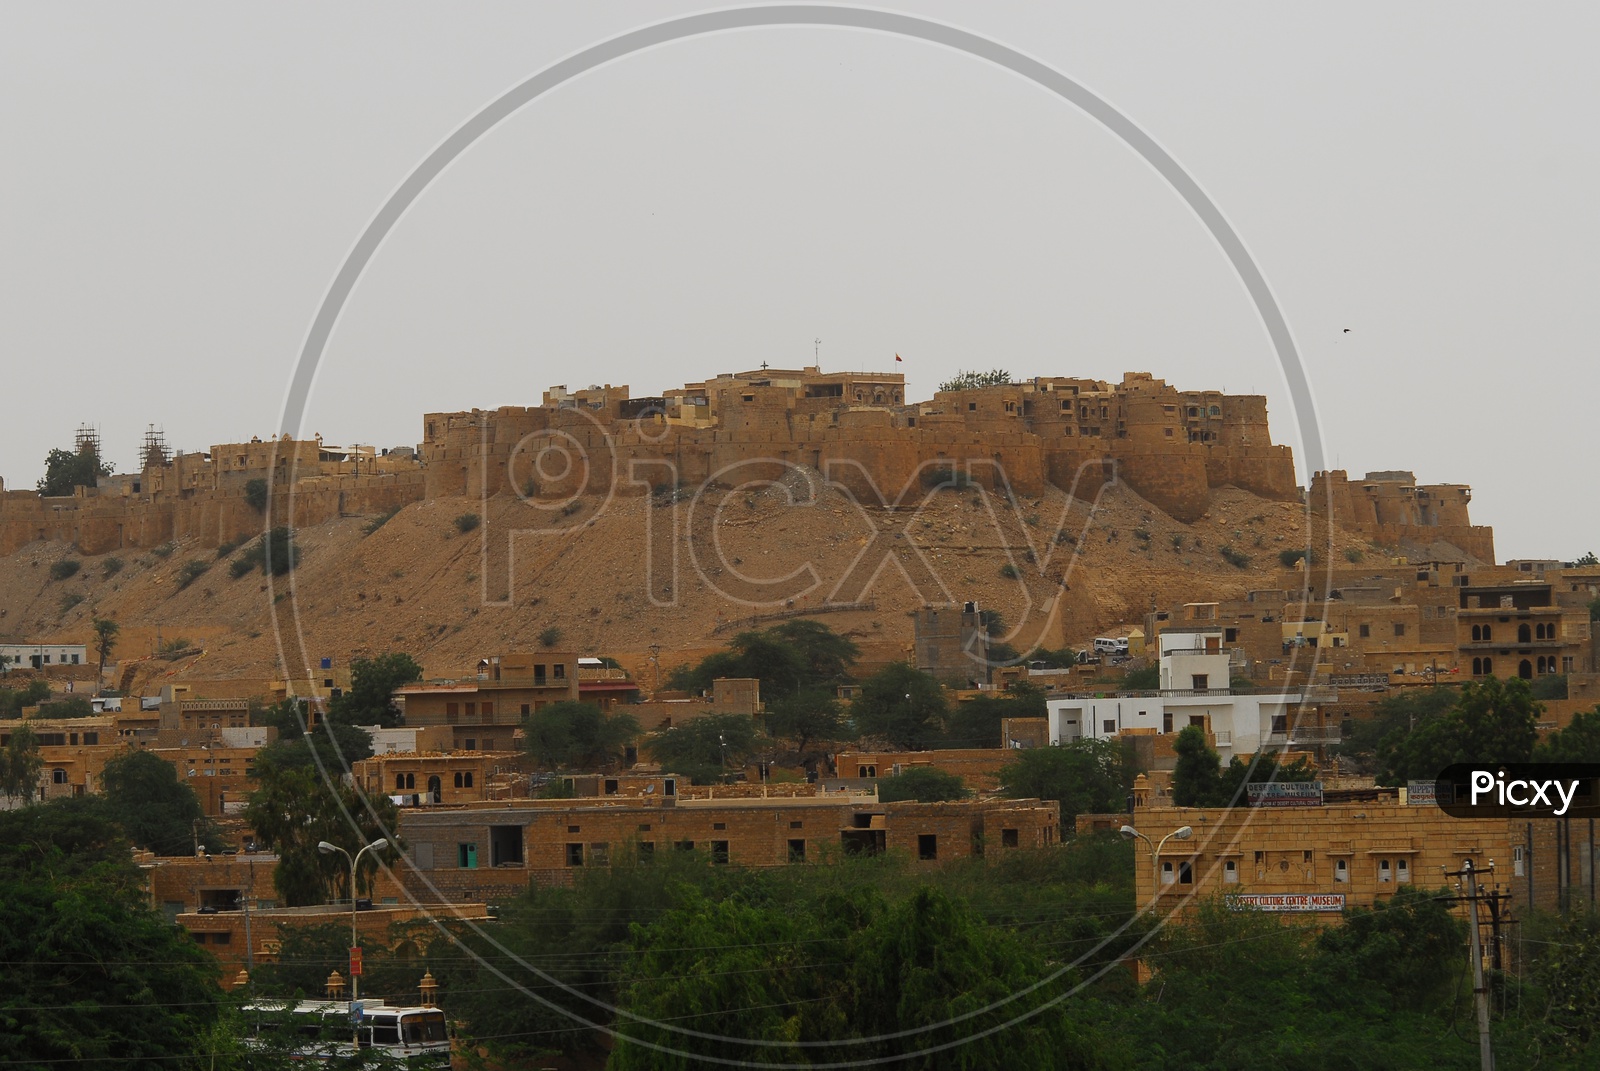 Jaisalmer fort, also known as Sonar quila